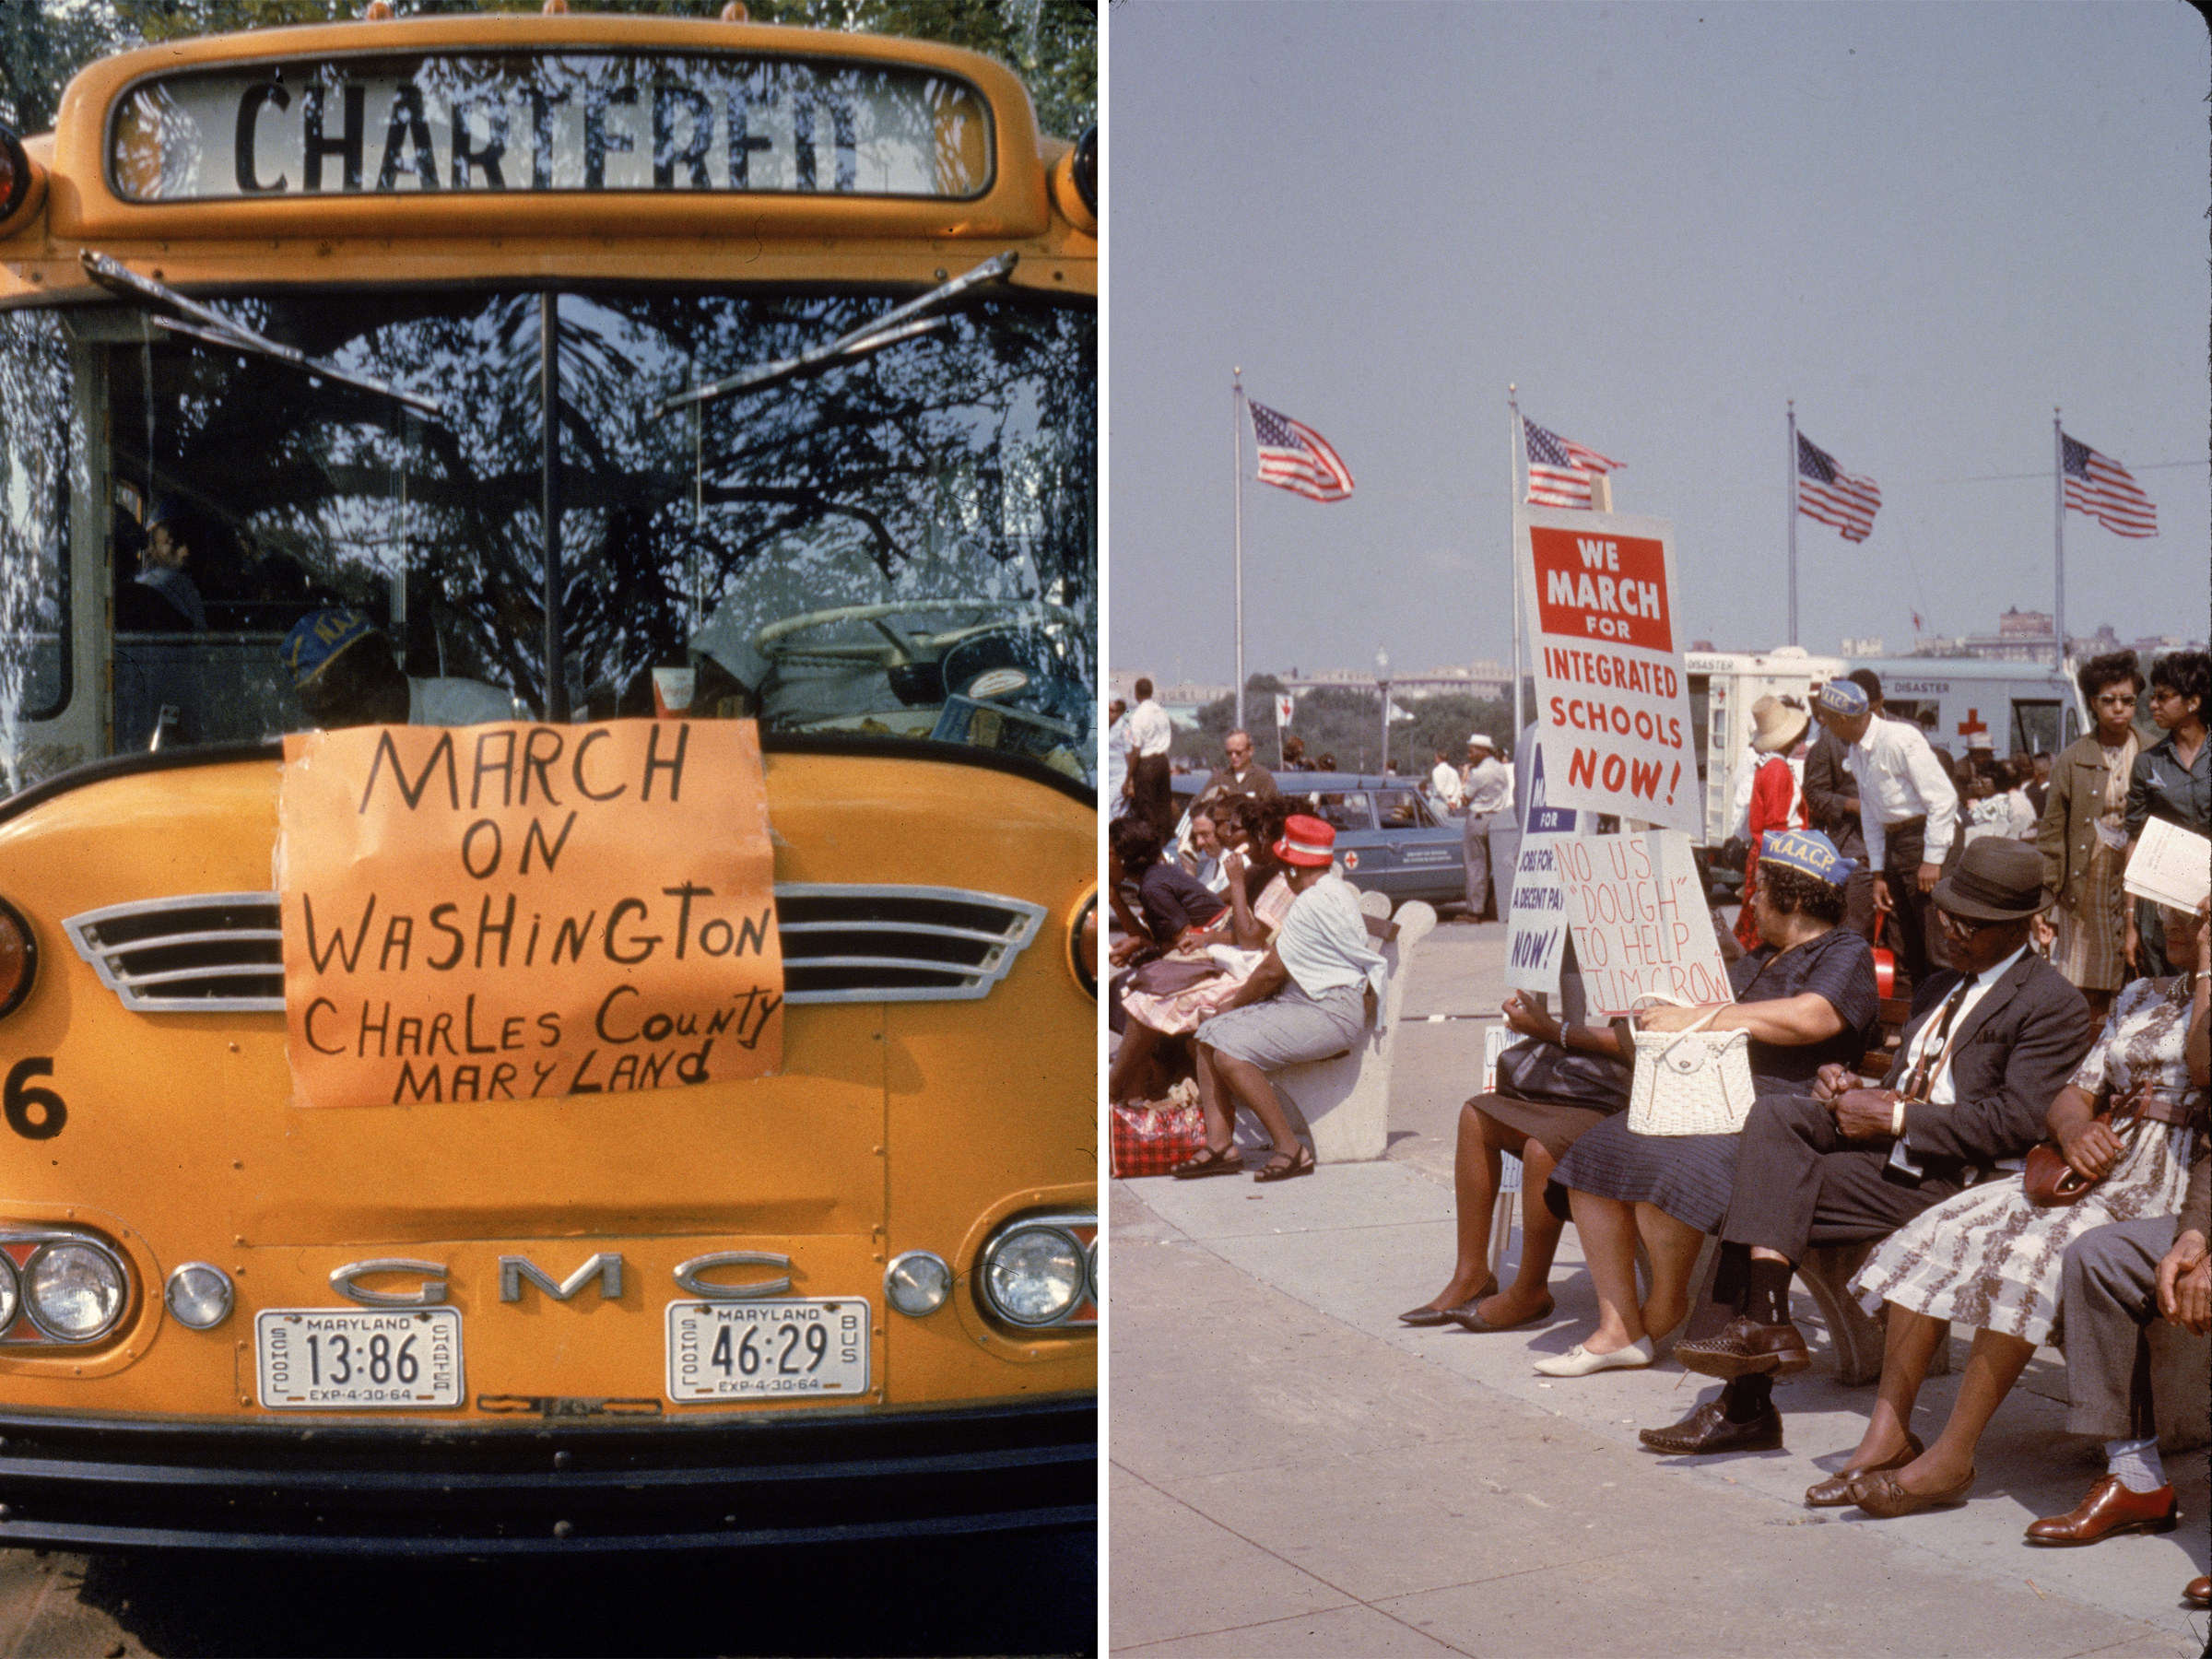 The left photo shows a yellow bus with a sign saying &quot;March on Washington Charles Country, Maryland.&quot; The right photo shows people resting on benches during the March on Washington.